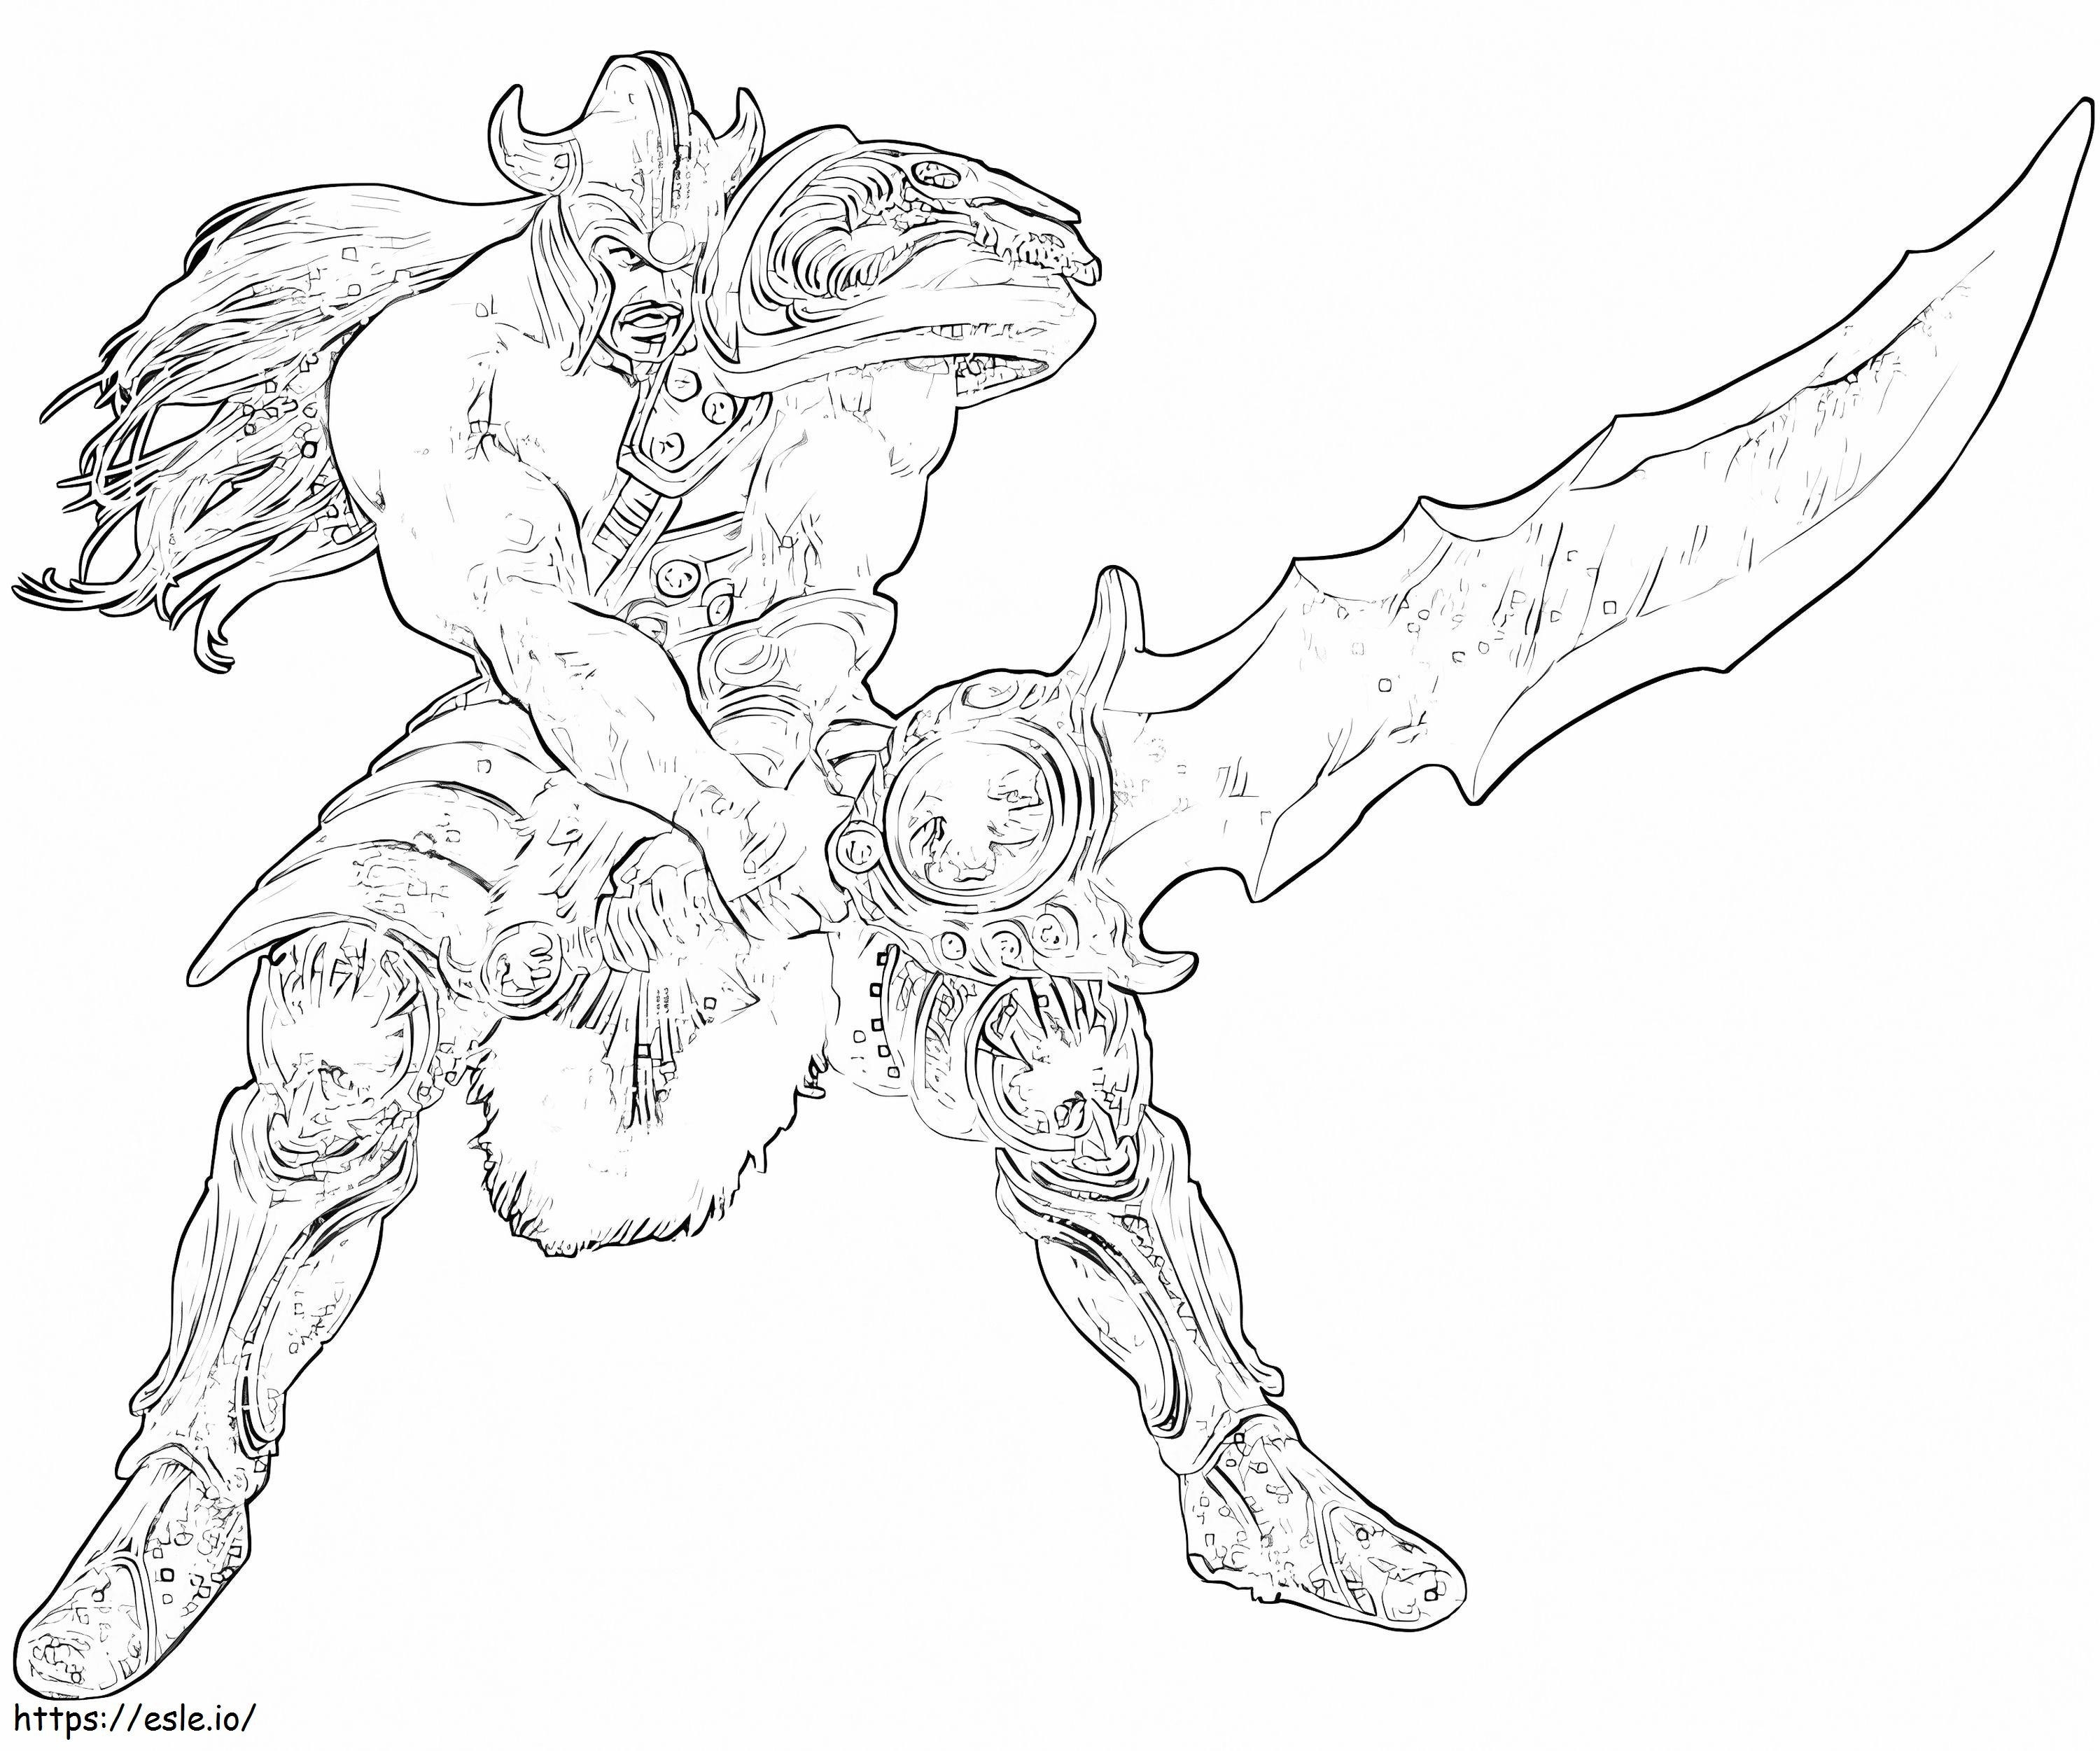 Tryndamere With Sword coloring page